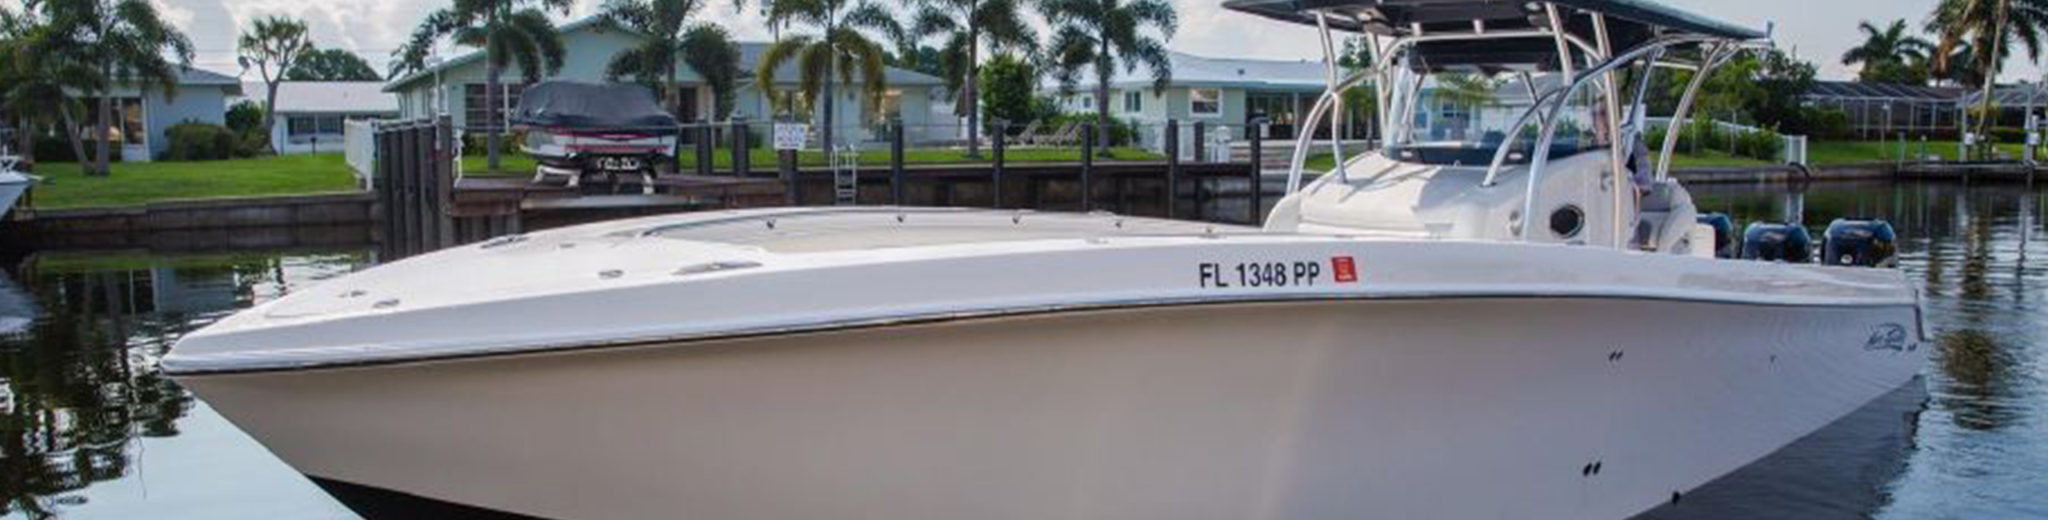 Used Boats for Sale Fort Myers